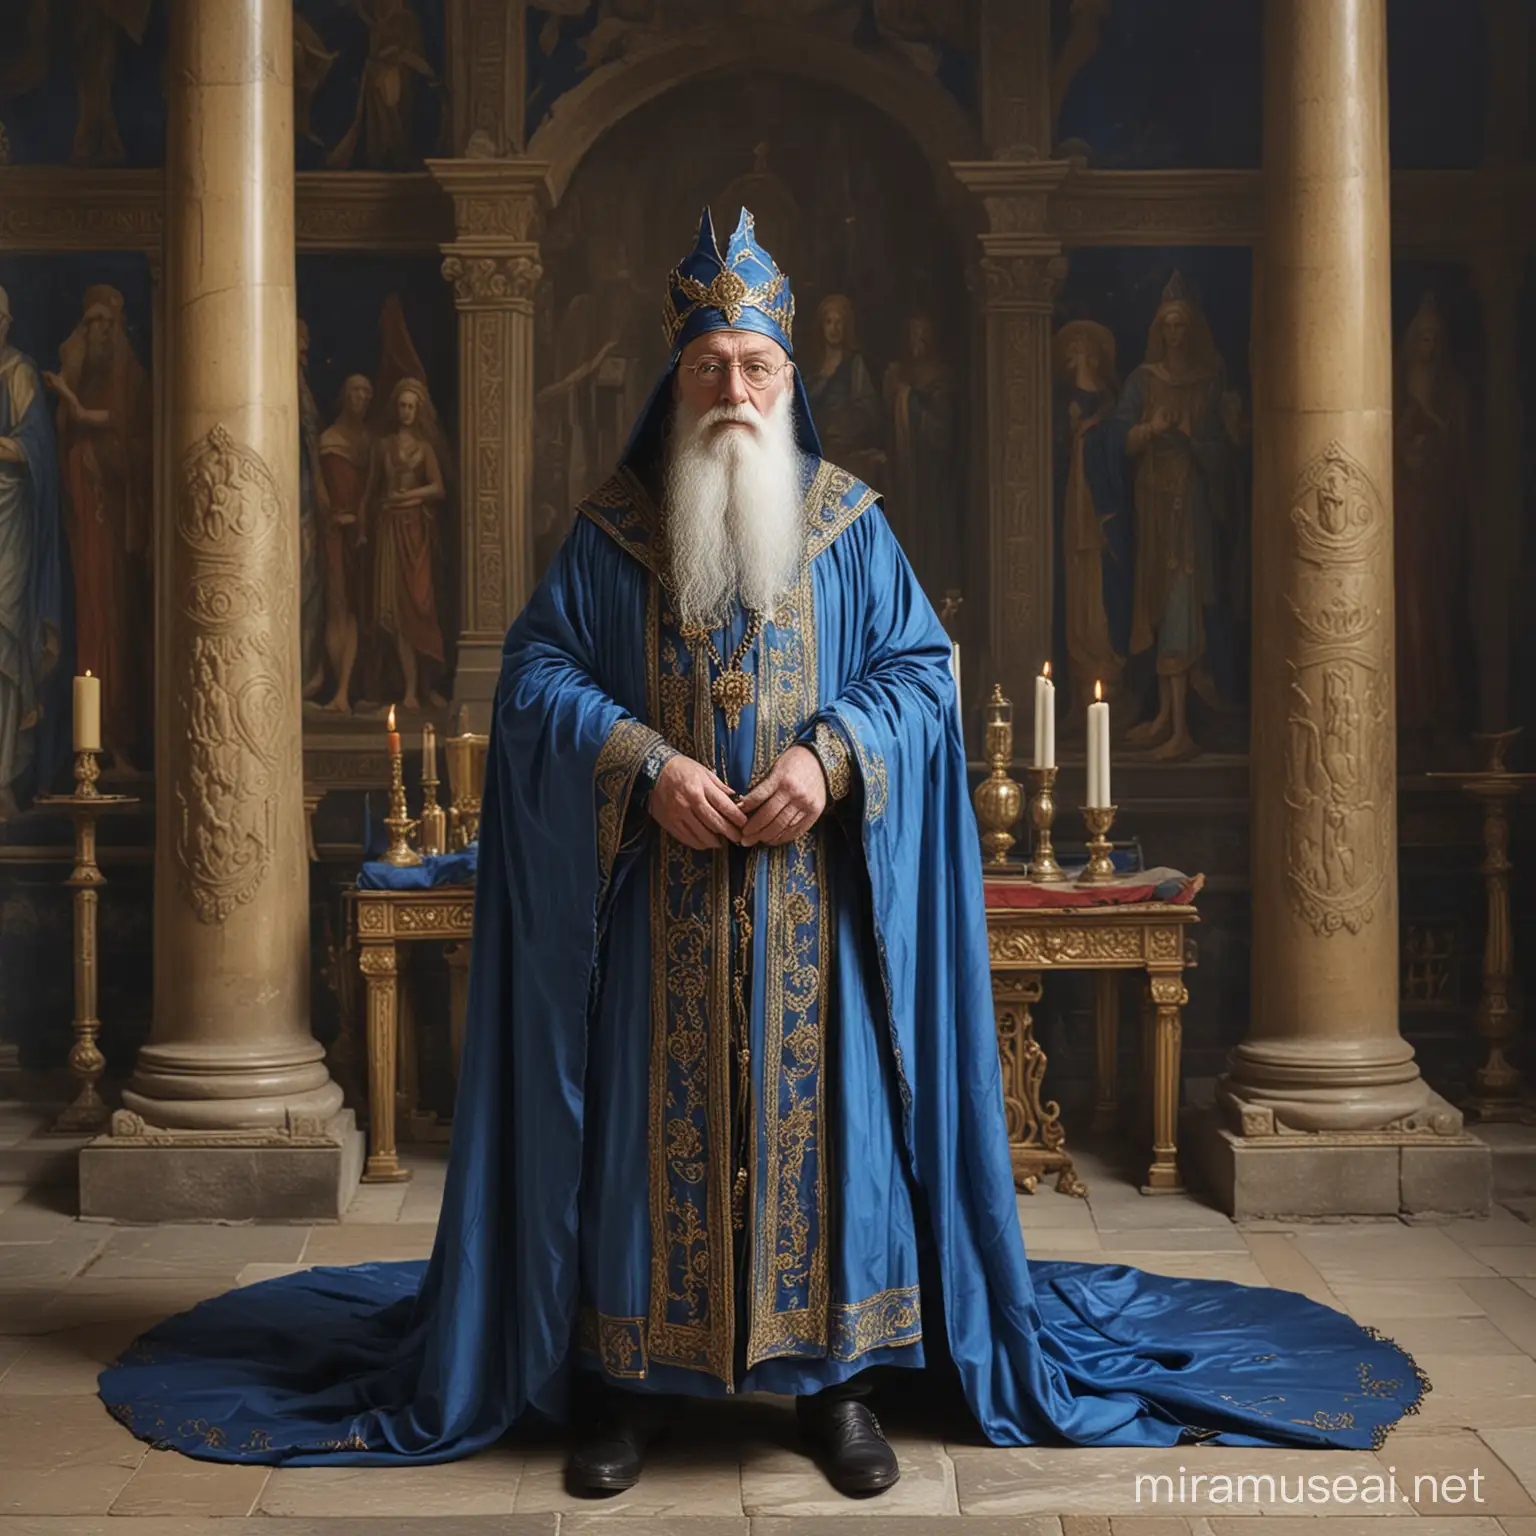 An old, venerable wizard, clad in a blue robe and surcote. He presides a ceremony inside a temple with gilded walls. In the background there's an altar with the effigies of a pagan god and goddess 